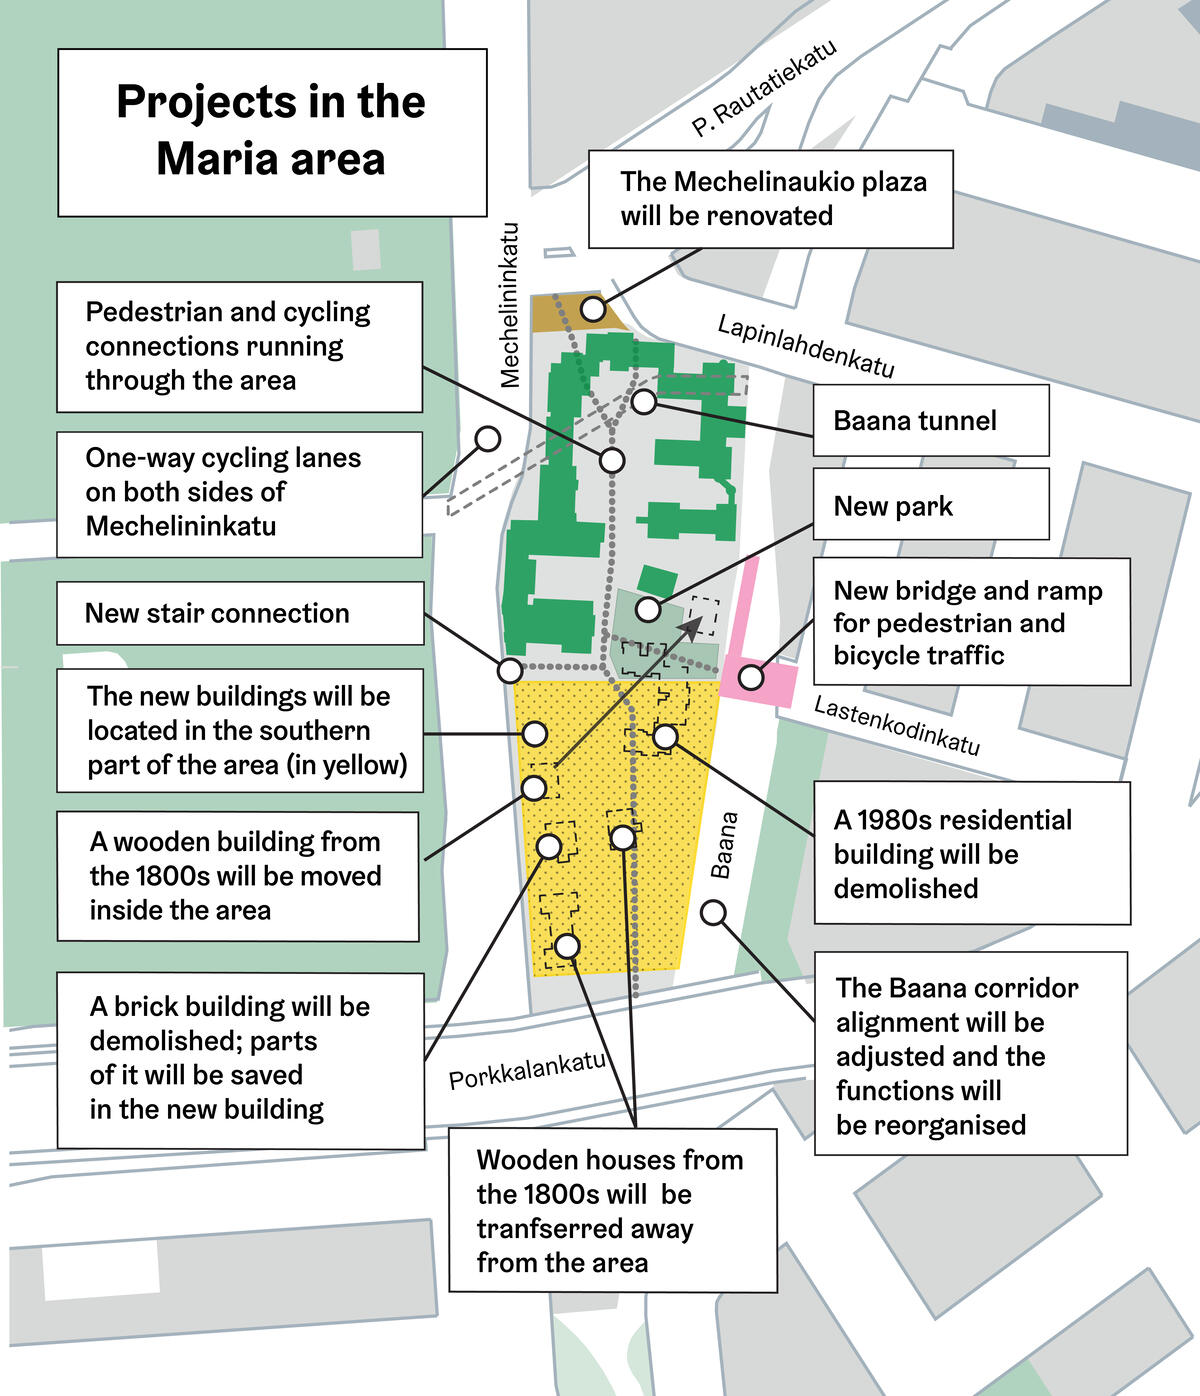 A map of Maria area showing planned projects